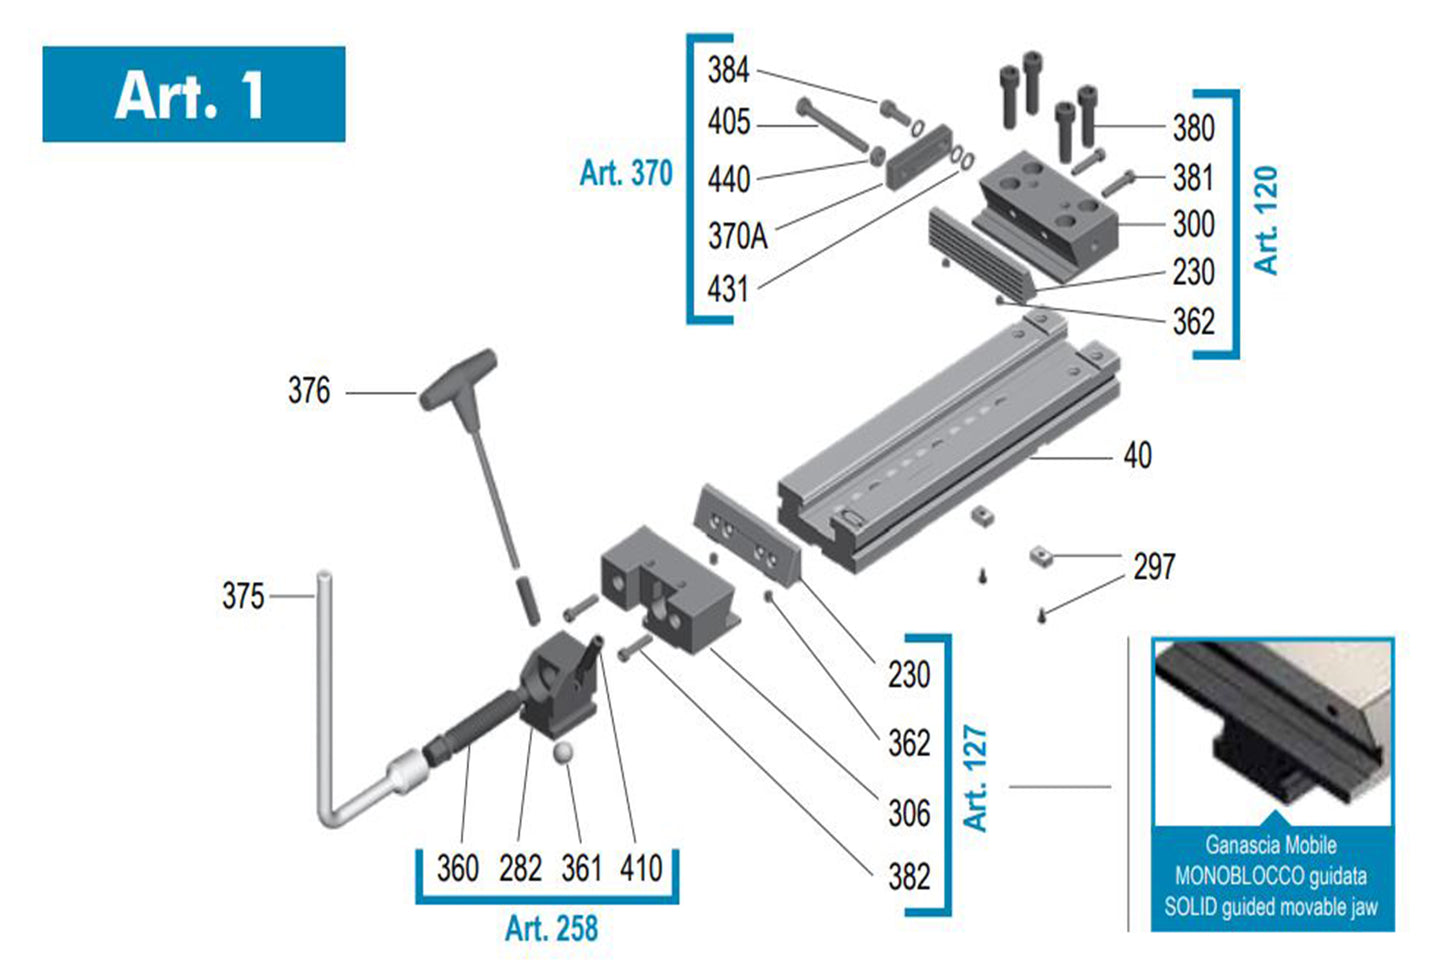 Gerardi Standard Precision Modular Vice with Solid Guided Movable Jaw (Width = 200mm, Opening = 300mm)